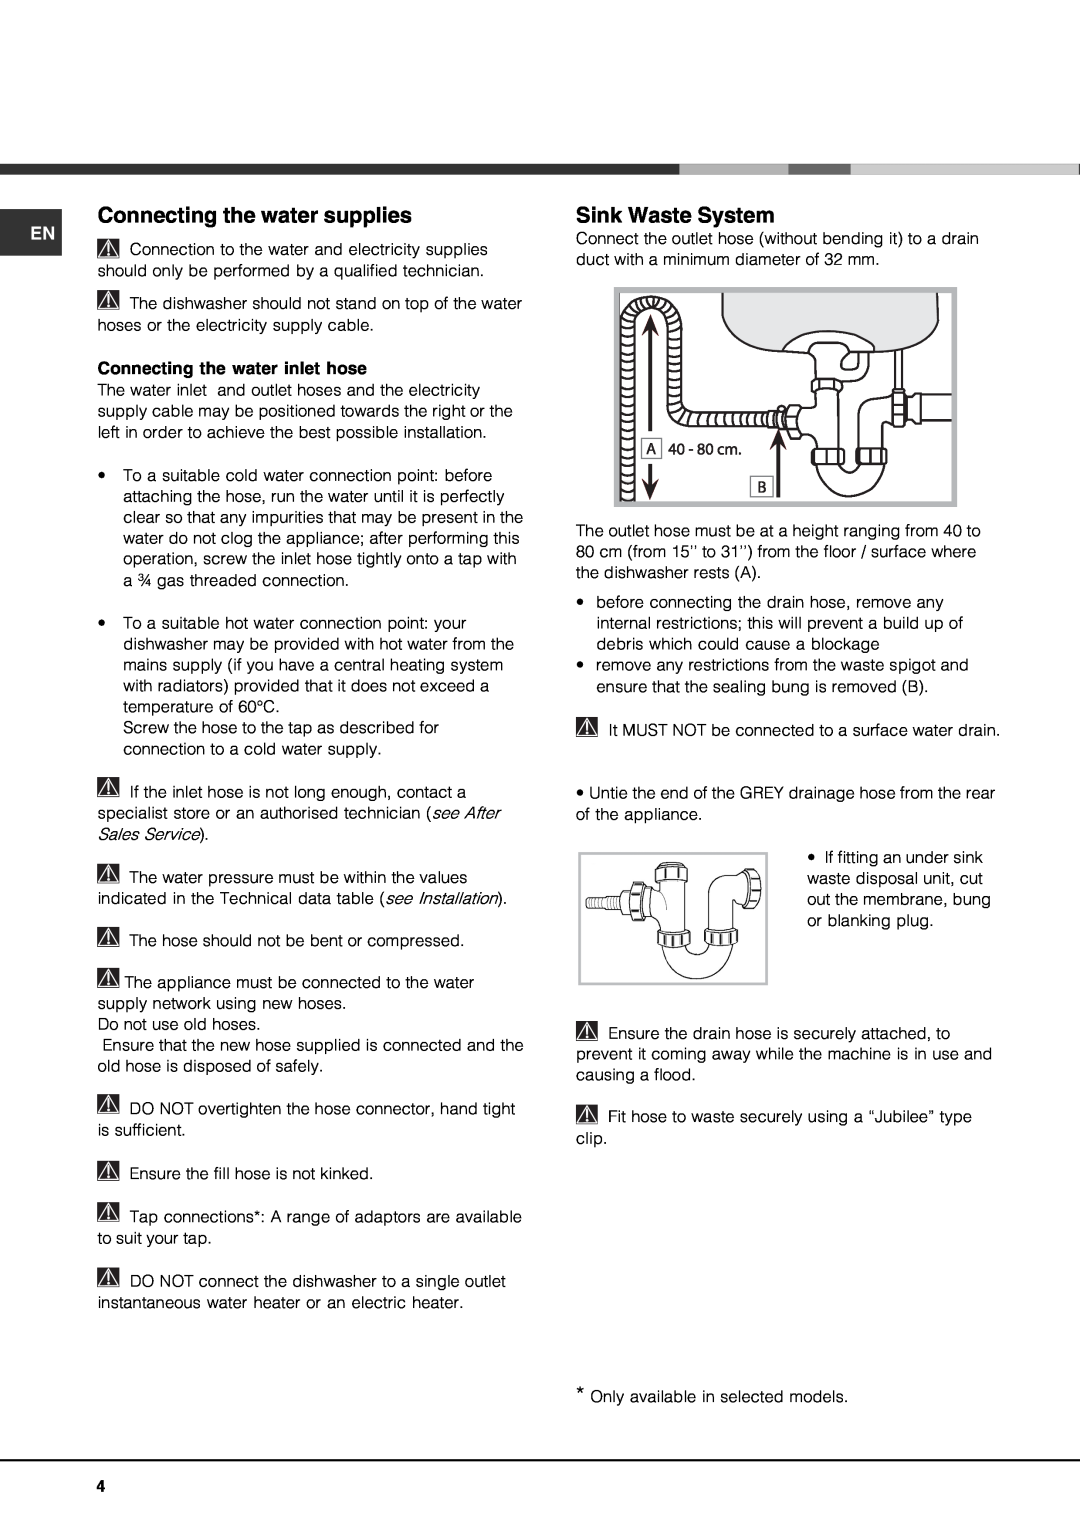 Hotpoint LFT 228 manual Connecting the water supplies, Sink Waste System, Connecting the water inlet hose 